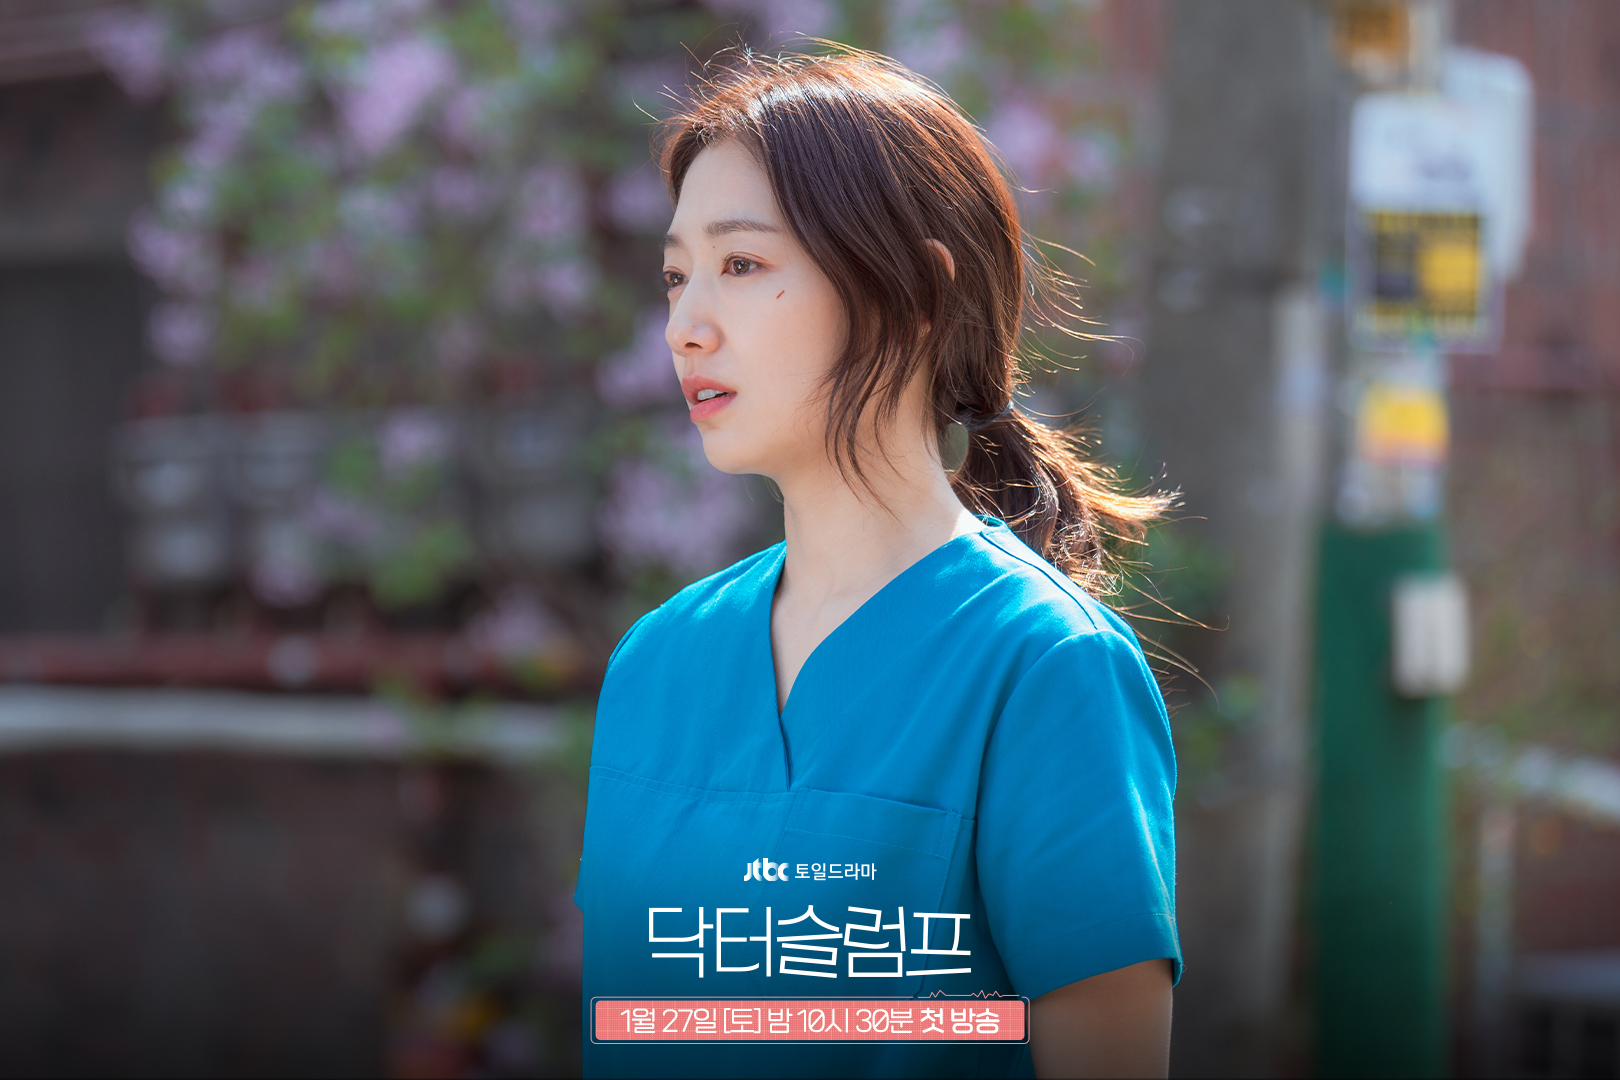 Park Shin Hye Is A Workaholic Doctor Suffering From Burnout In “Doctor Slump”